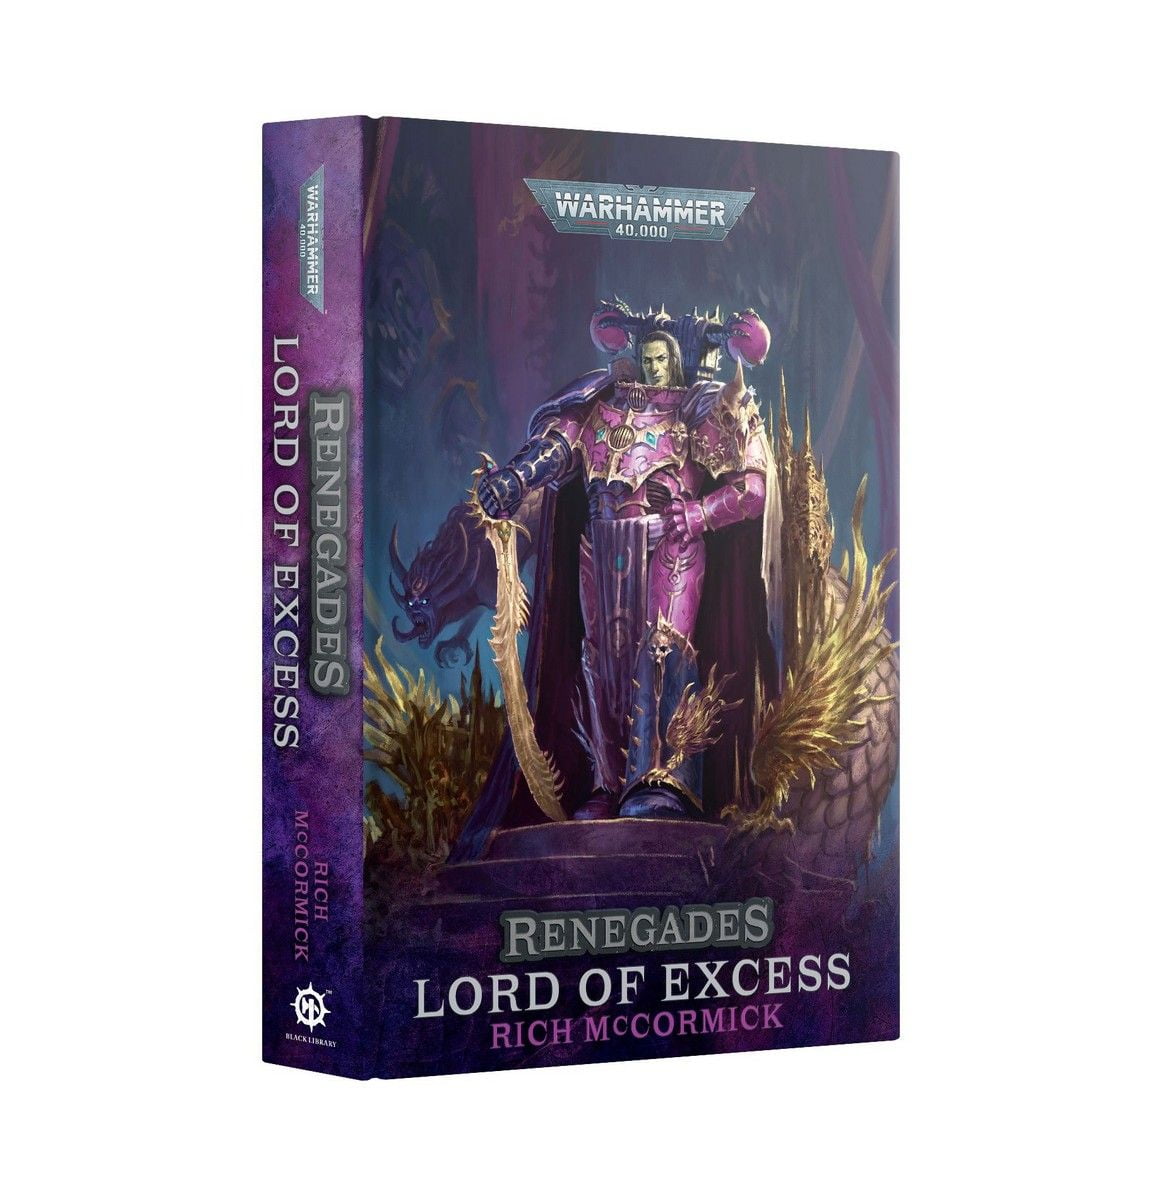 Renegades: Lord of Excess Hardback